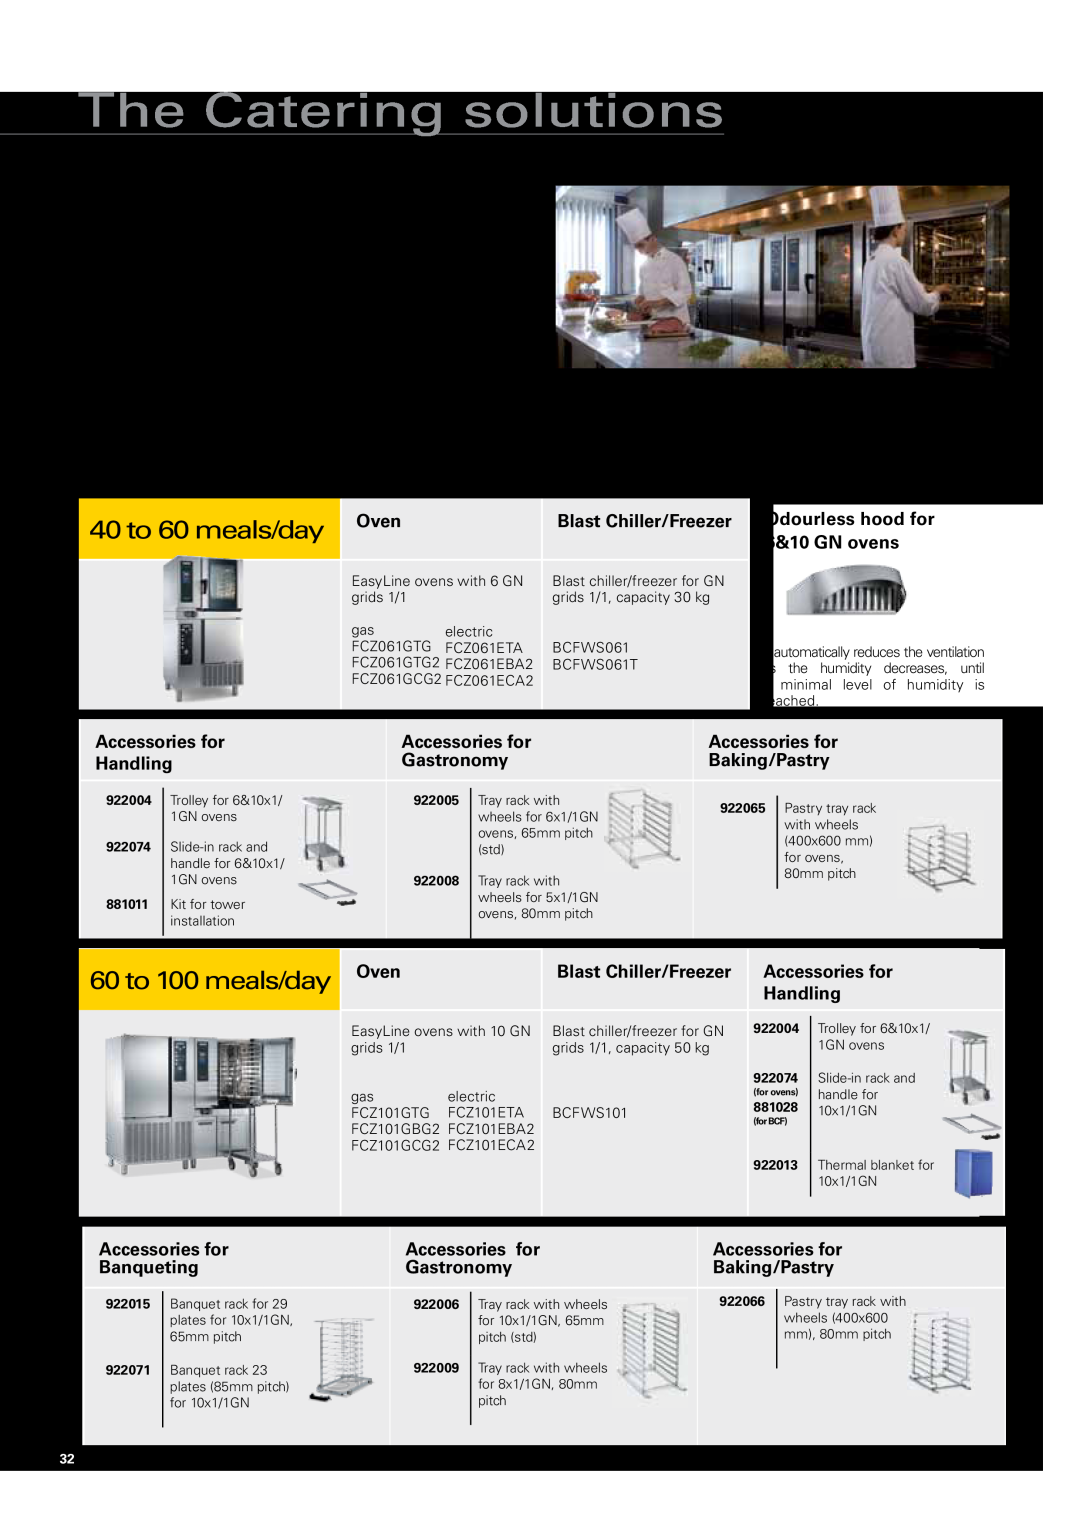 Zanussi Convection Oven manual The Catering solutions, 40 to 60 meals/day, 60 to 100 meals/day 